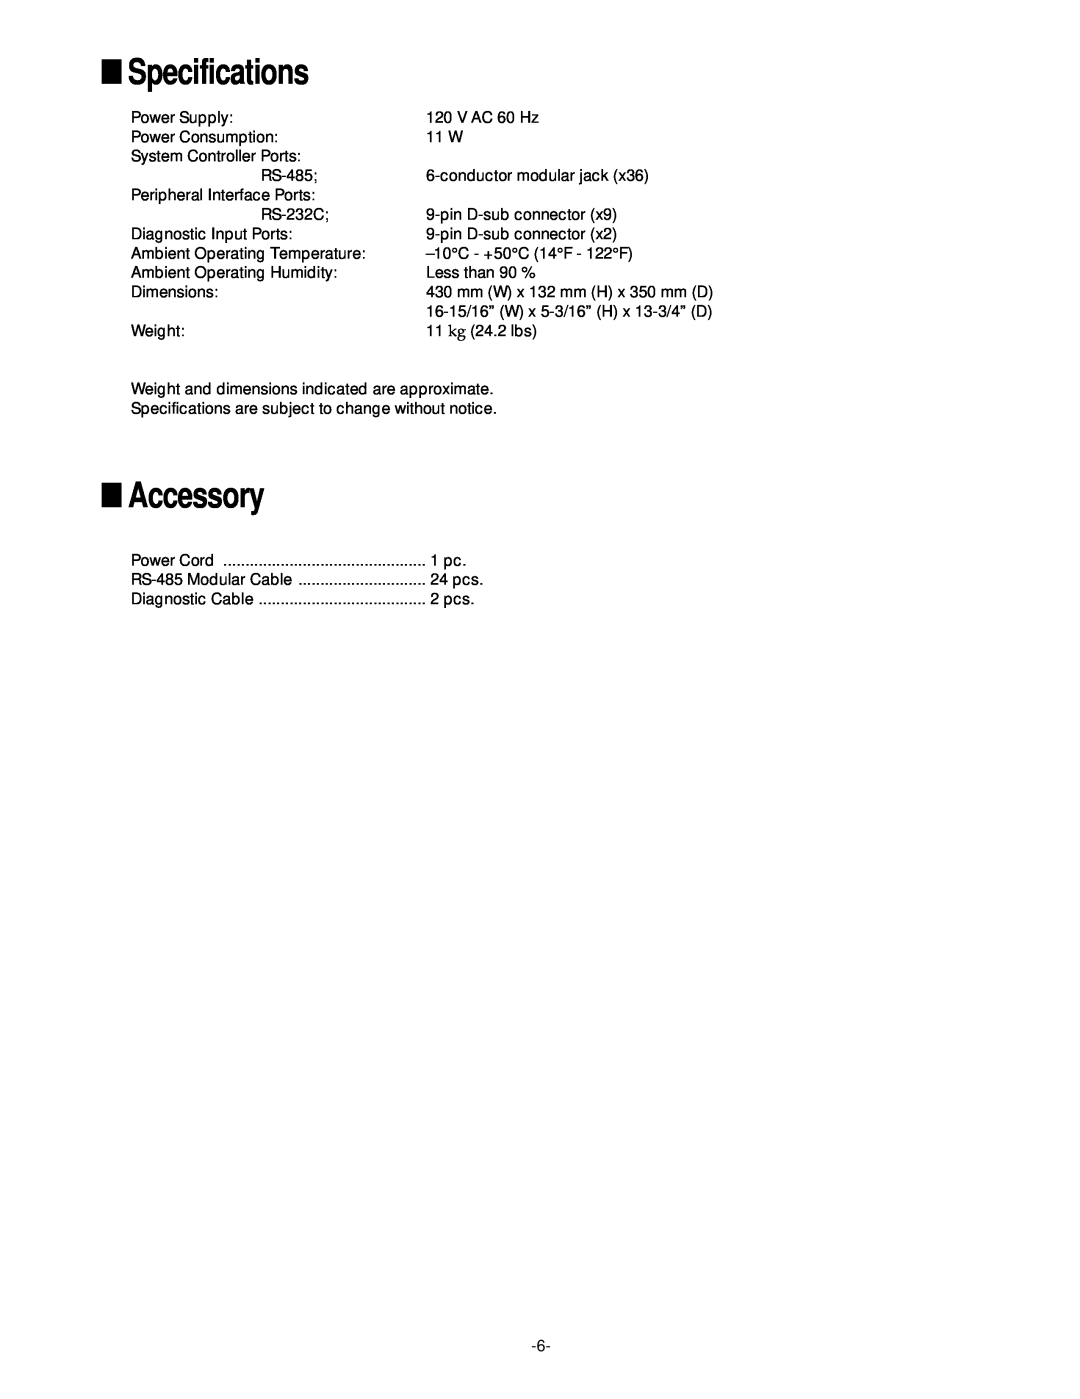 Panasonic WJ-MPS850 user service Specifications, Accessory, mm W x 132 mm H x 350 mm D 